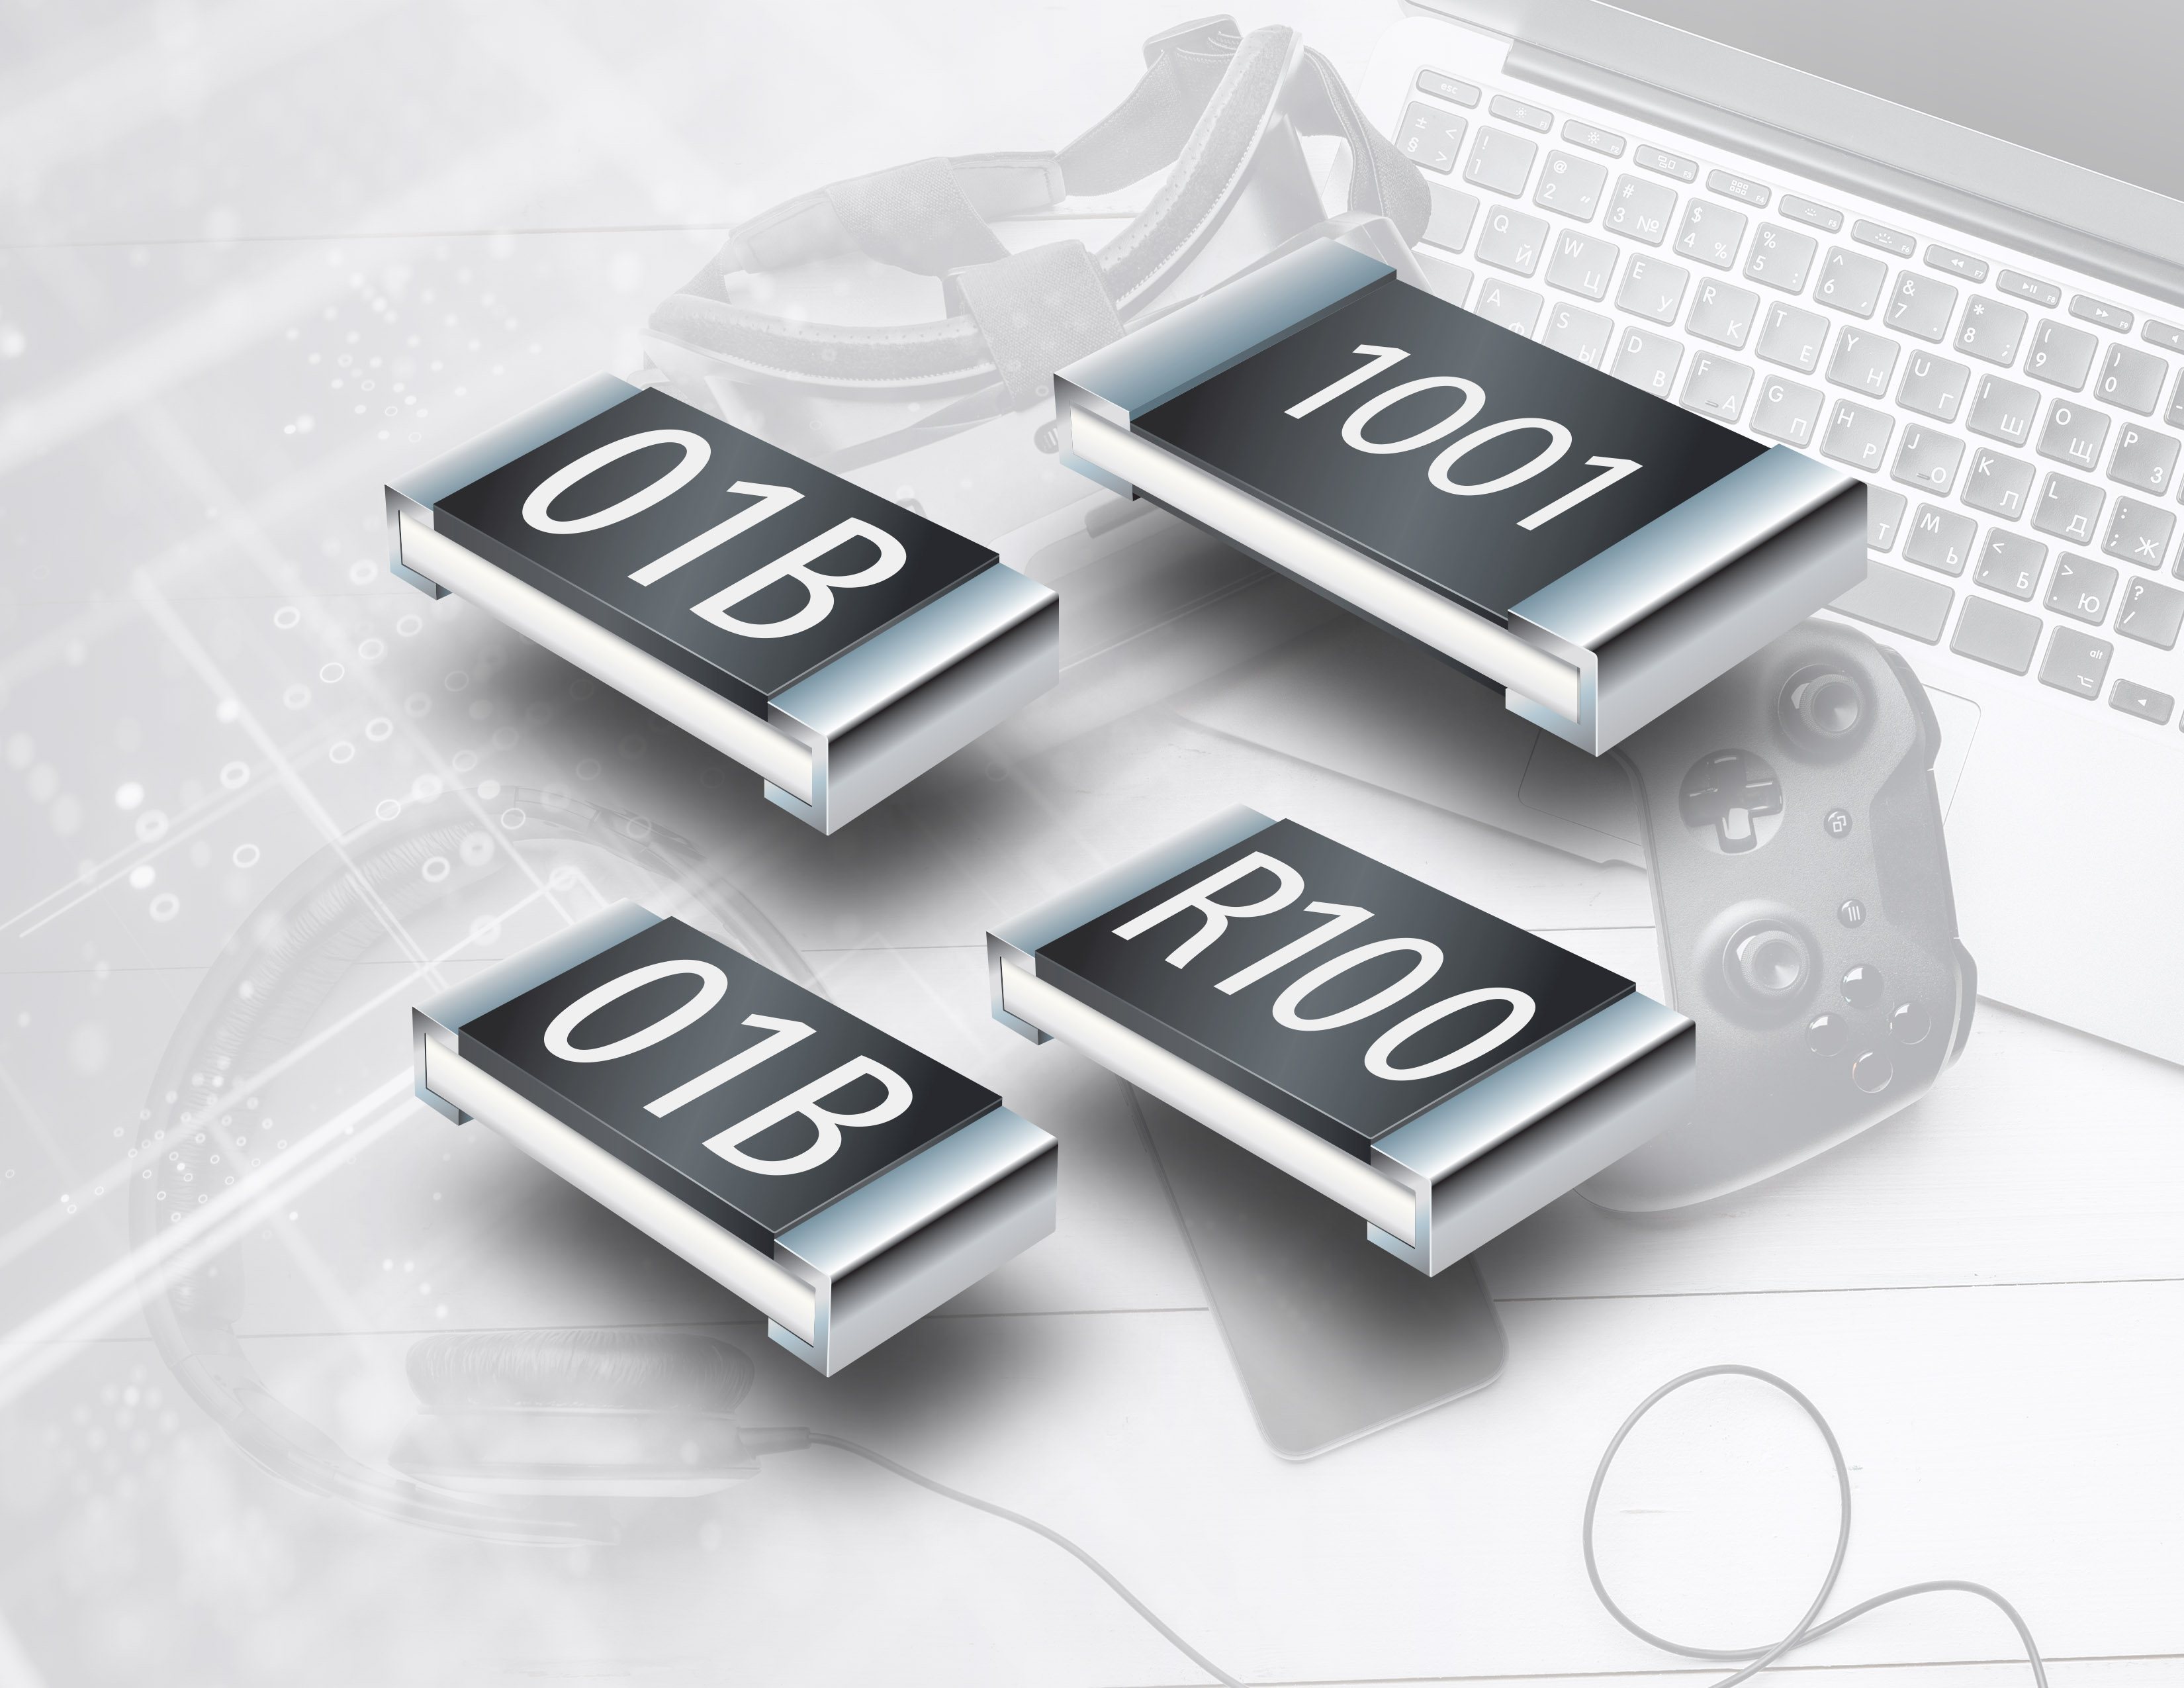 Bourns Expands High Power Thick Film Chip Resistor Line with Four New AEC-Q200 Compliant Series